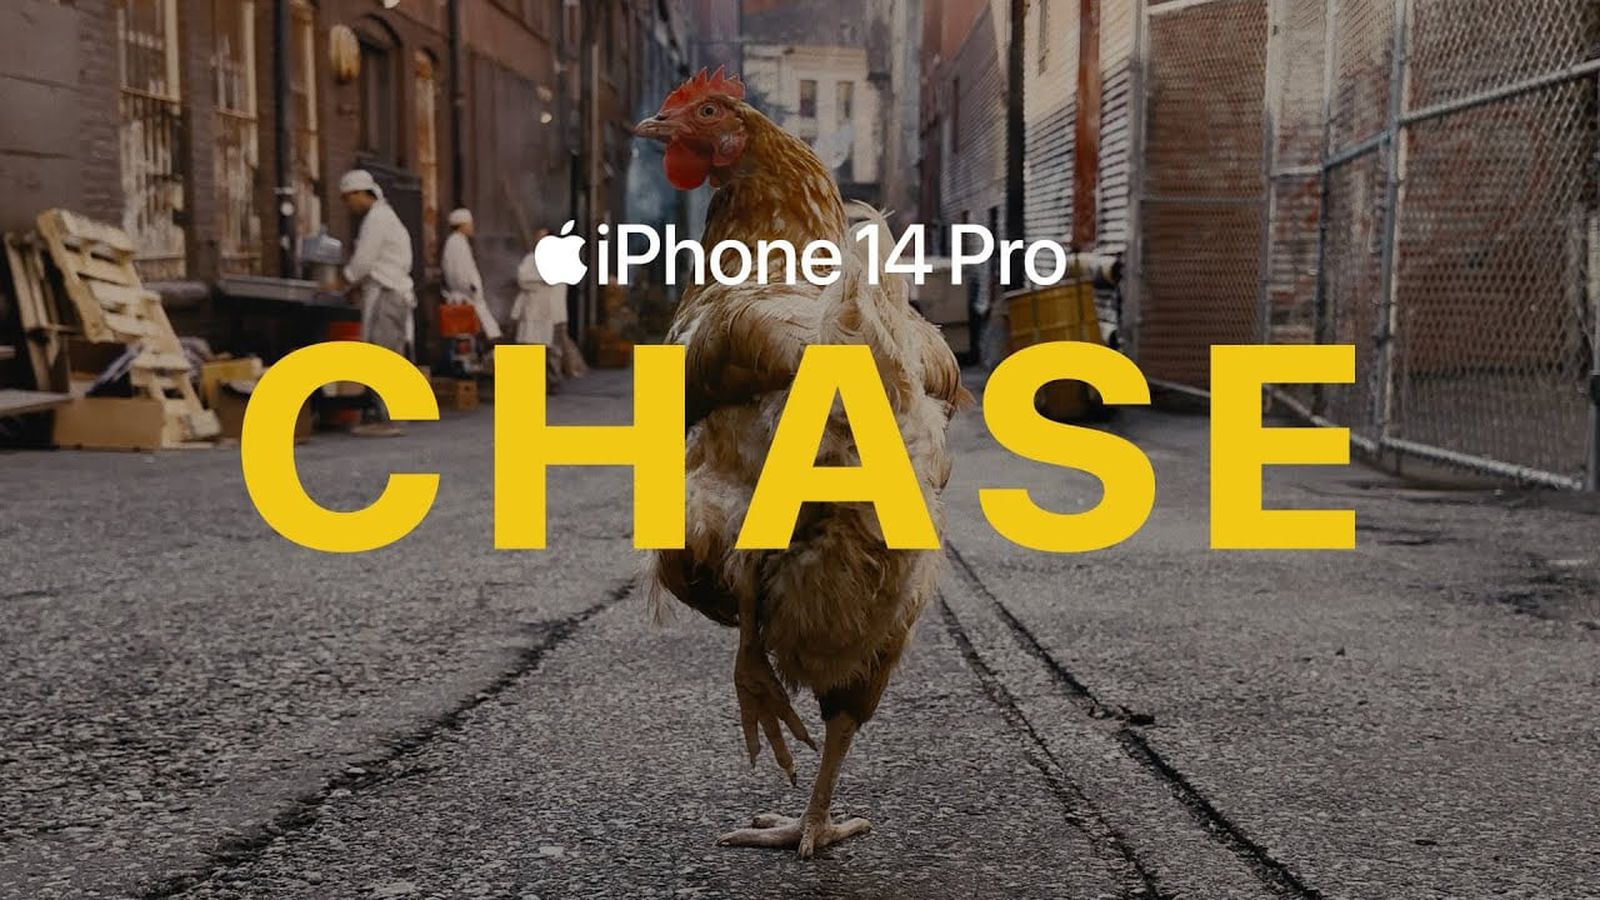 Apple Shares New 'Chase' Ad Touting iPhone 14 Pro Camera Features